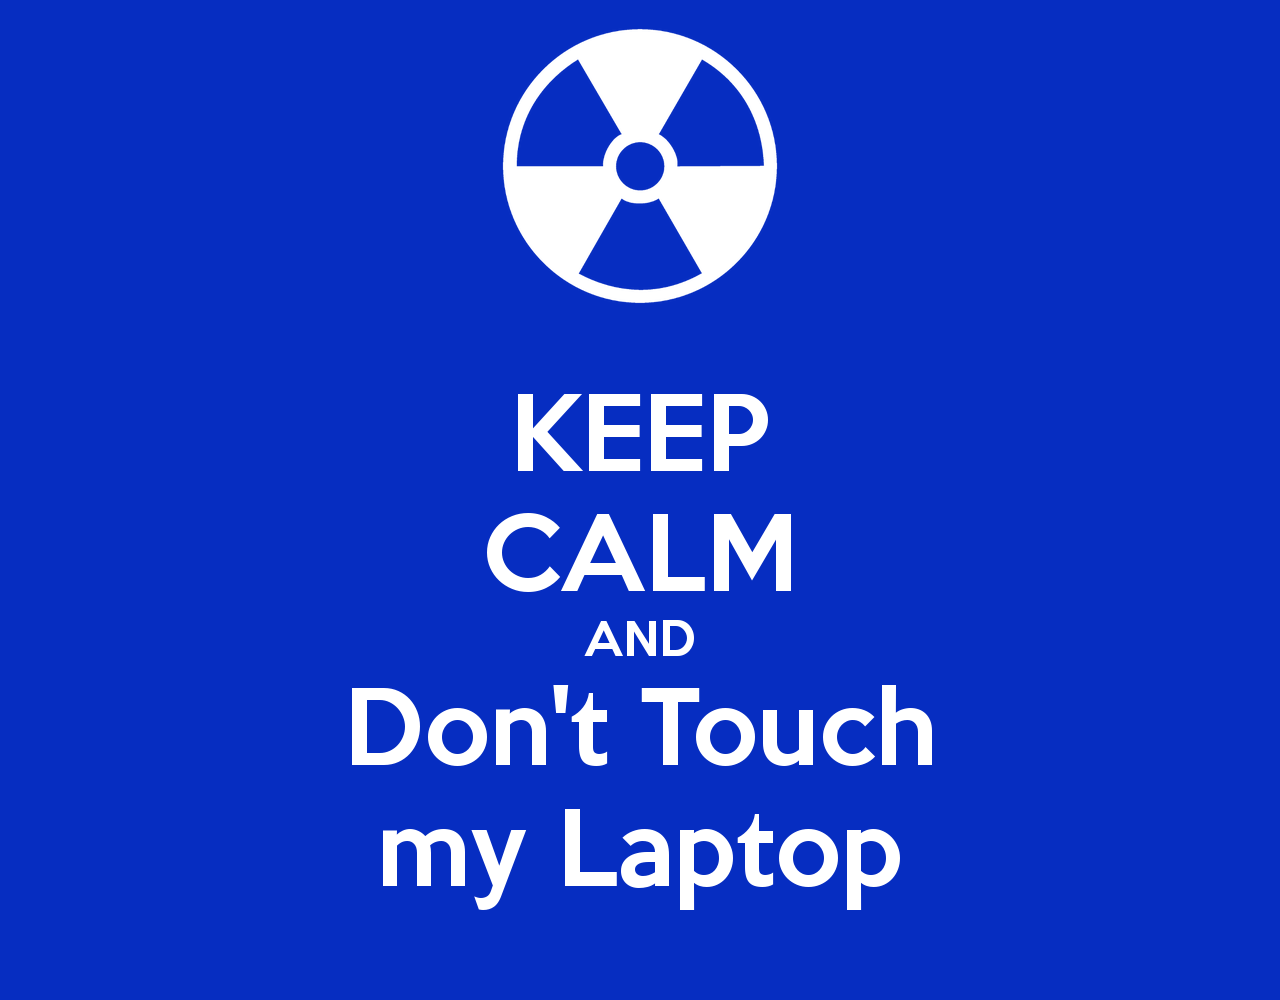 KEEP CALM AND Dont Touch my Laptop   KEEP CALM AND CARRY ON Image